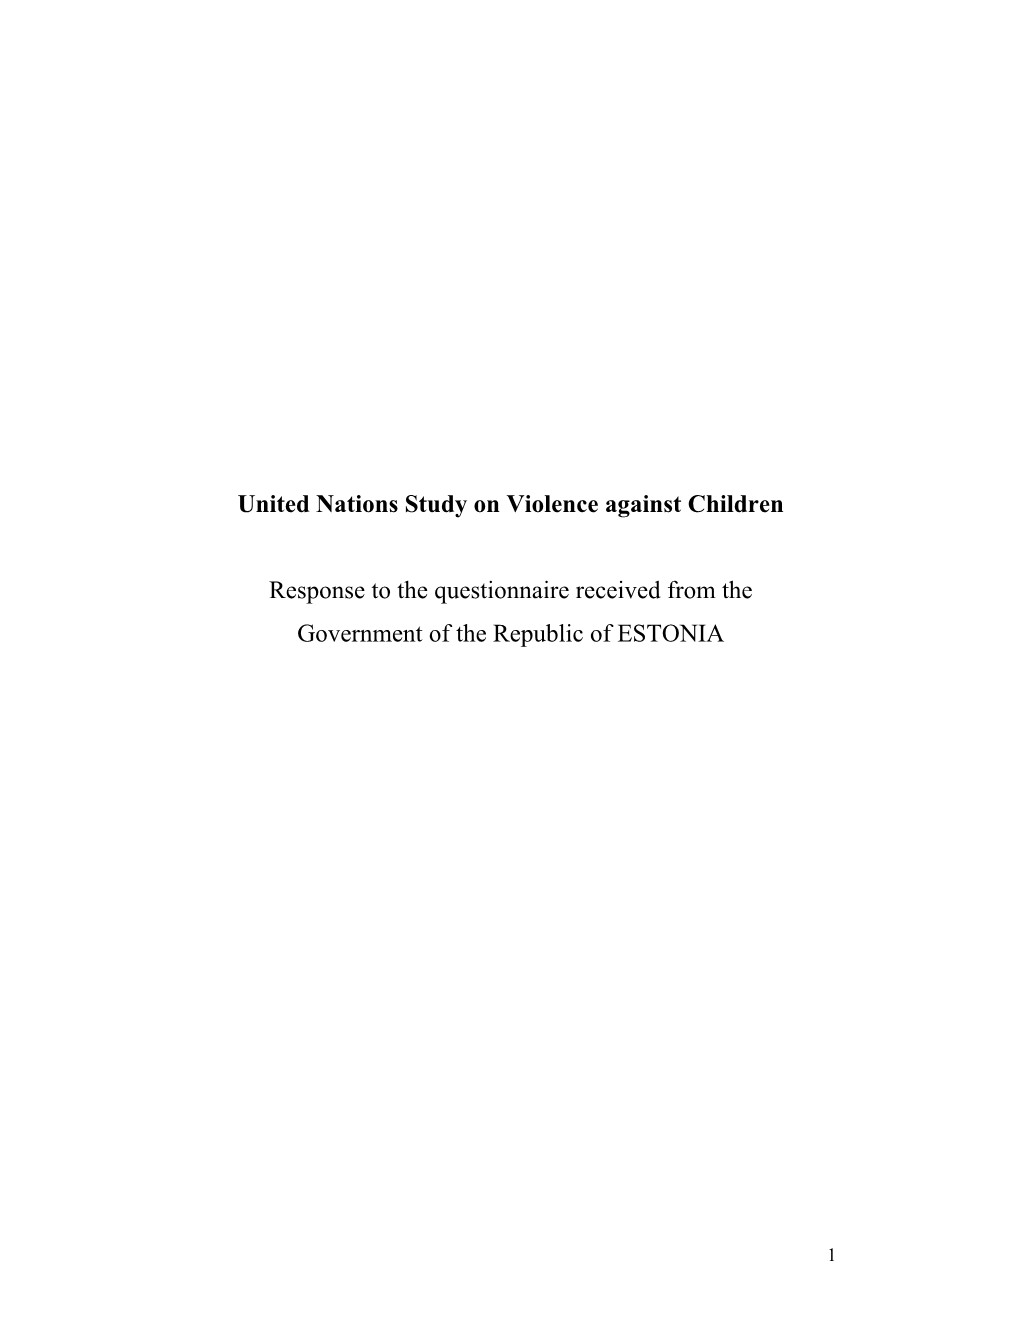 United Nations Study on Violence Against Children Response to The